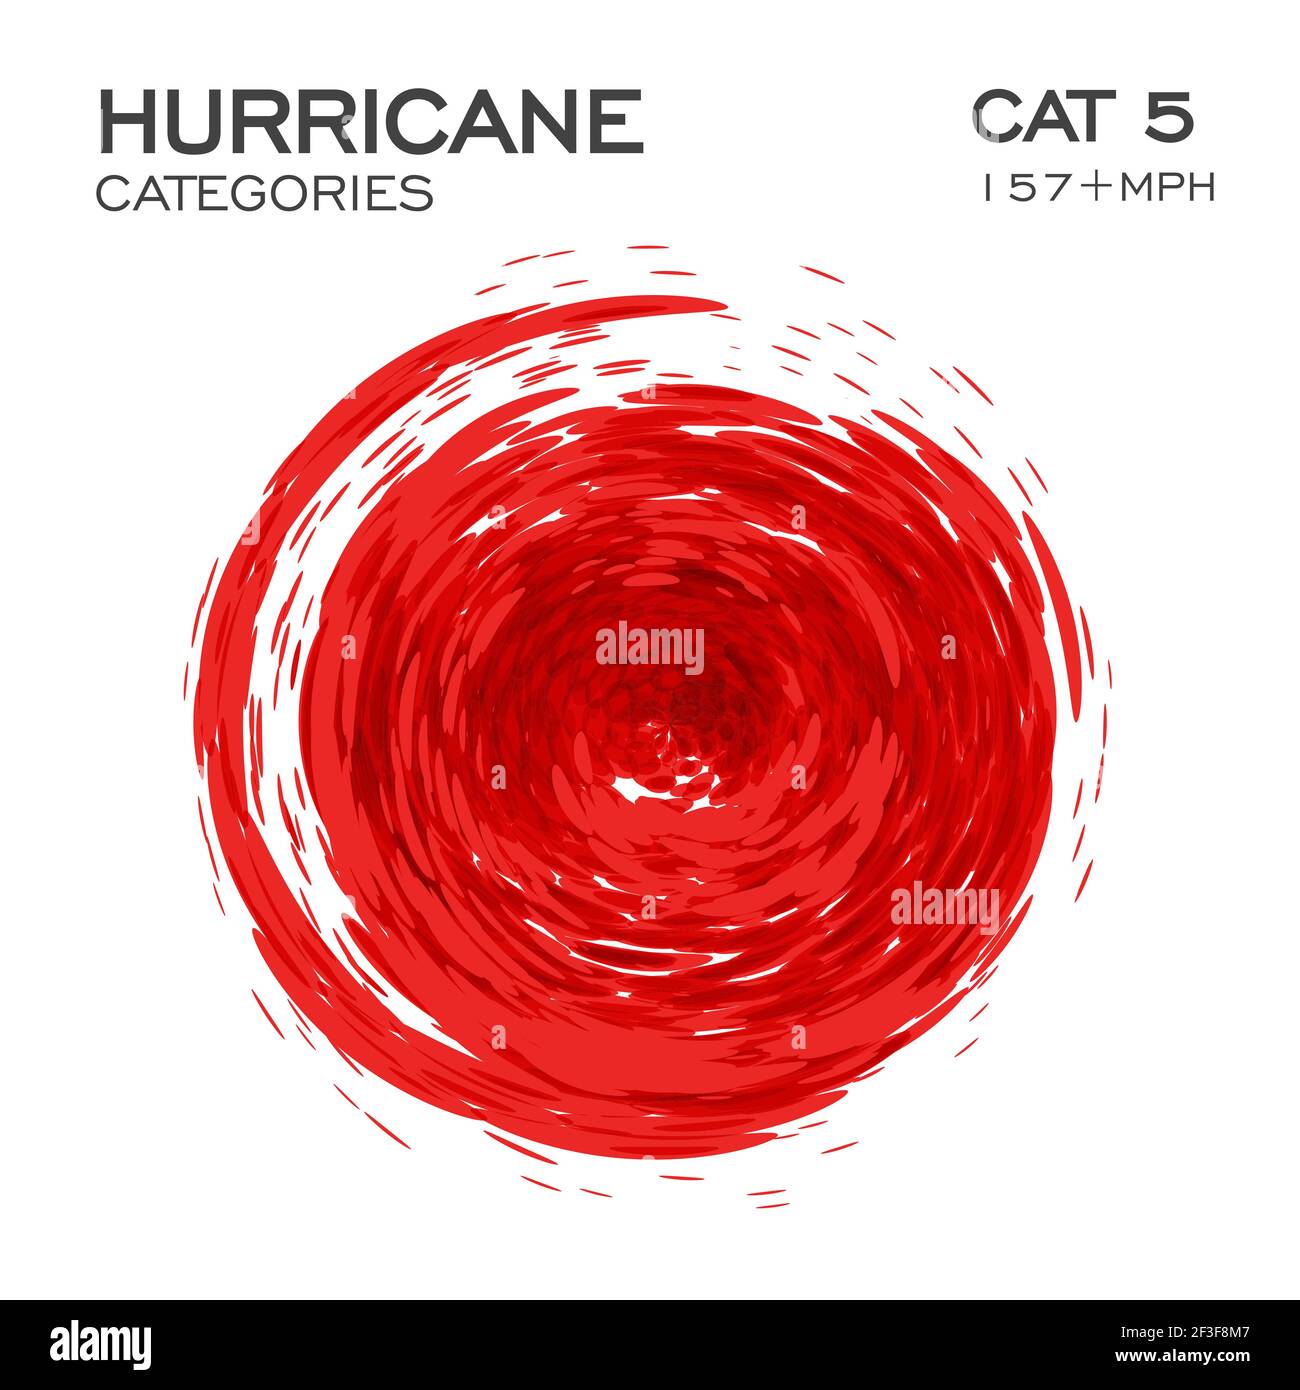 Category 5 hurricane infographic element for hurricane breaking news and warning. Swirl funnel of clouds and dust, vector illustration. Stock Vector